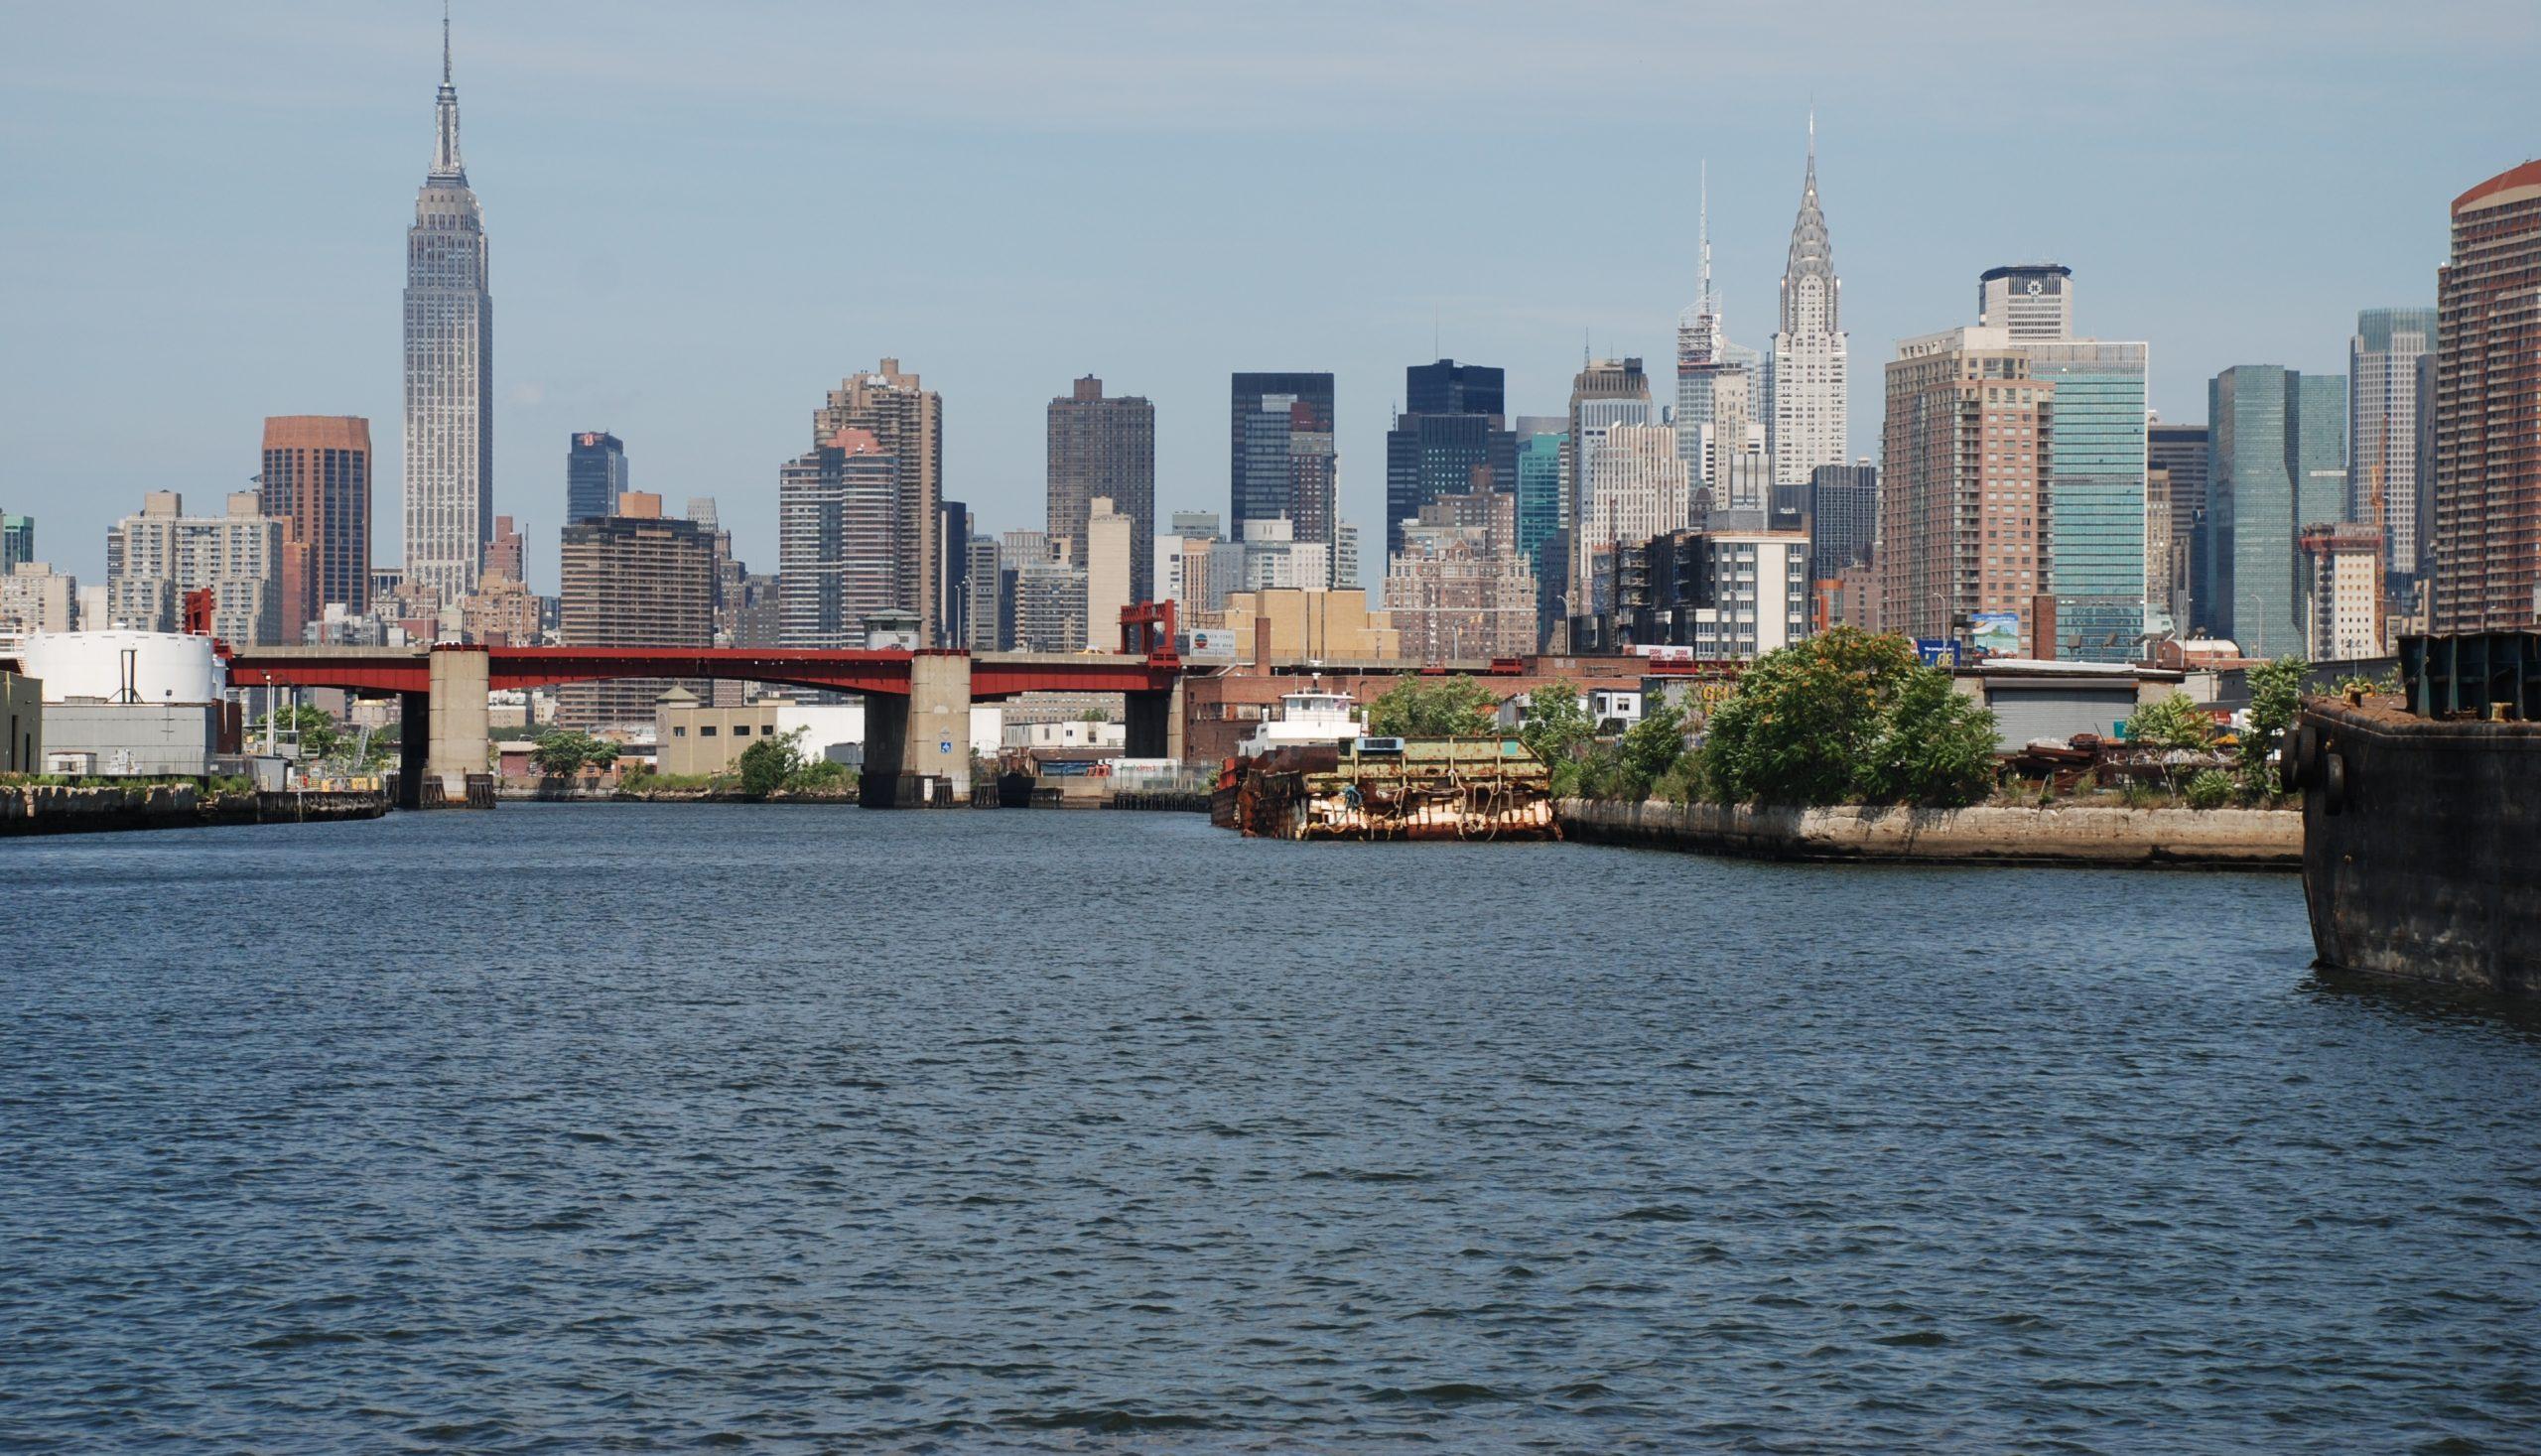 Named for a tributary that feeds into the East River and separates Brooklyn from the Queens, the waterfront site offers spectacular views of mid-town Manhattan.